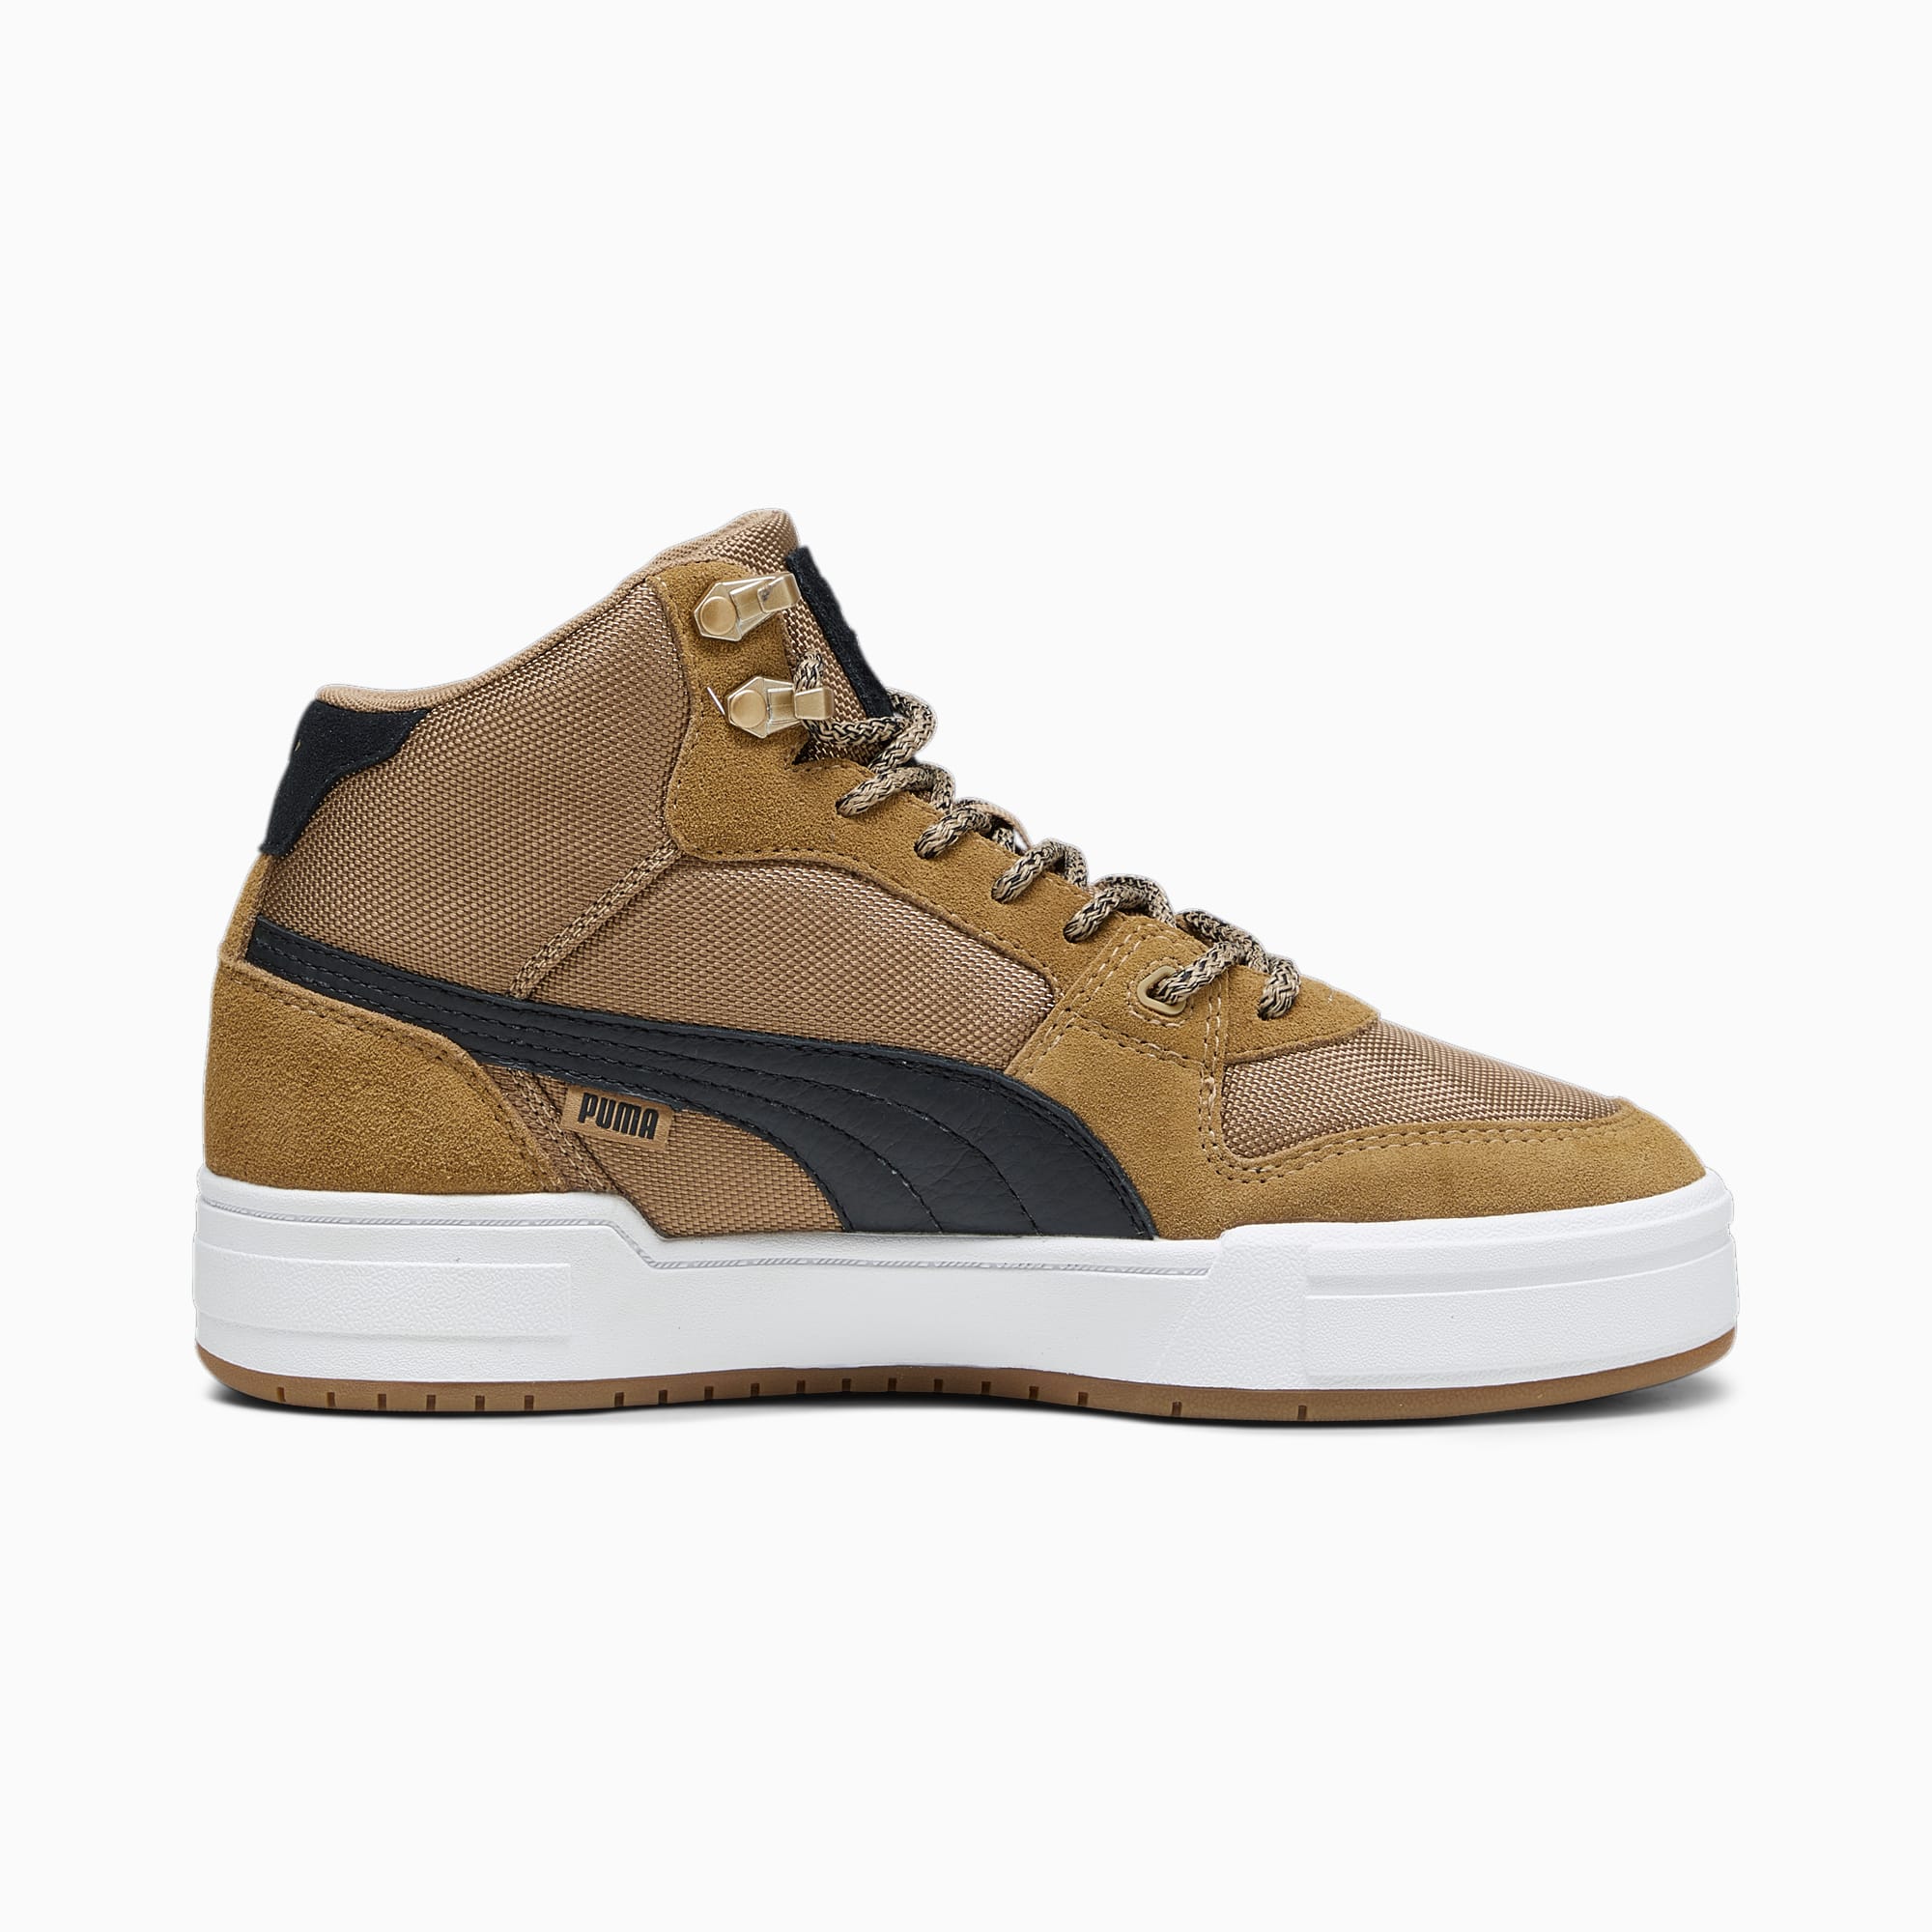 Men's PUMA Ca Pro Mid Trail Sneakers, Toasted/Black